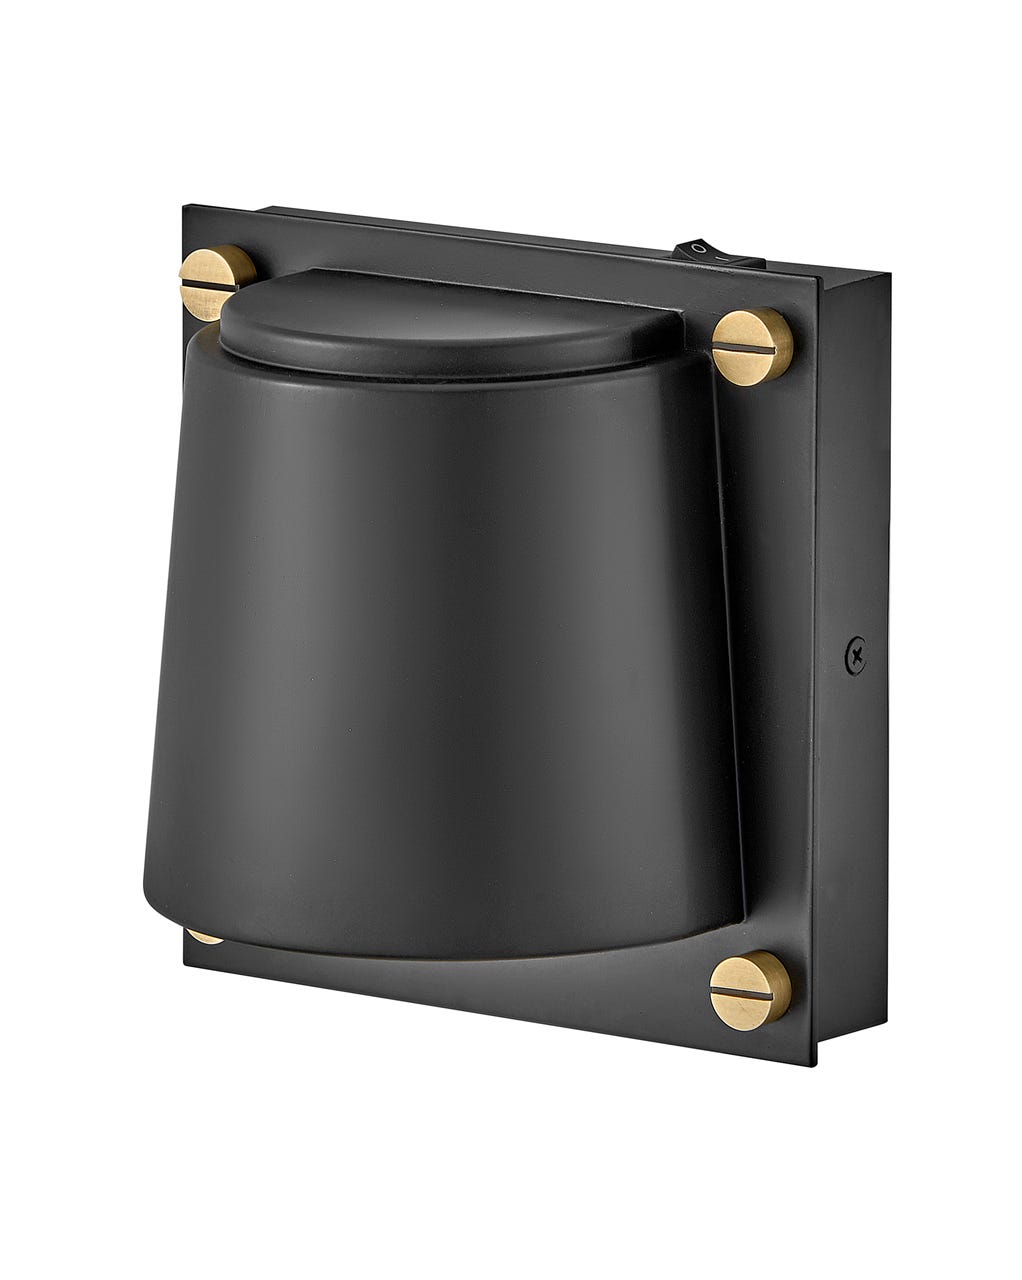 Hinkley Scout Sconce Sconce Hinkley Black 4.5x6.75x6.75 